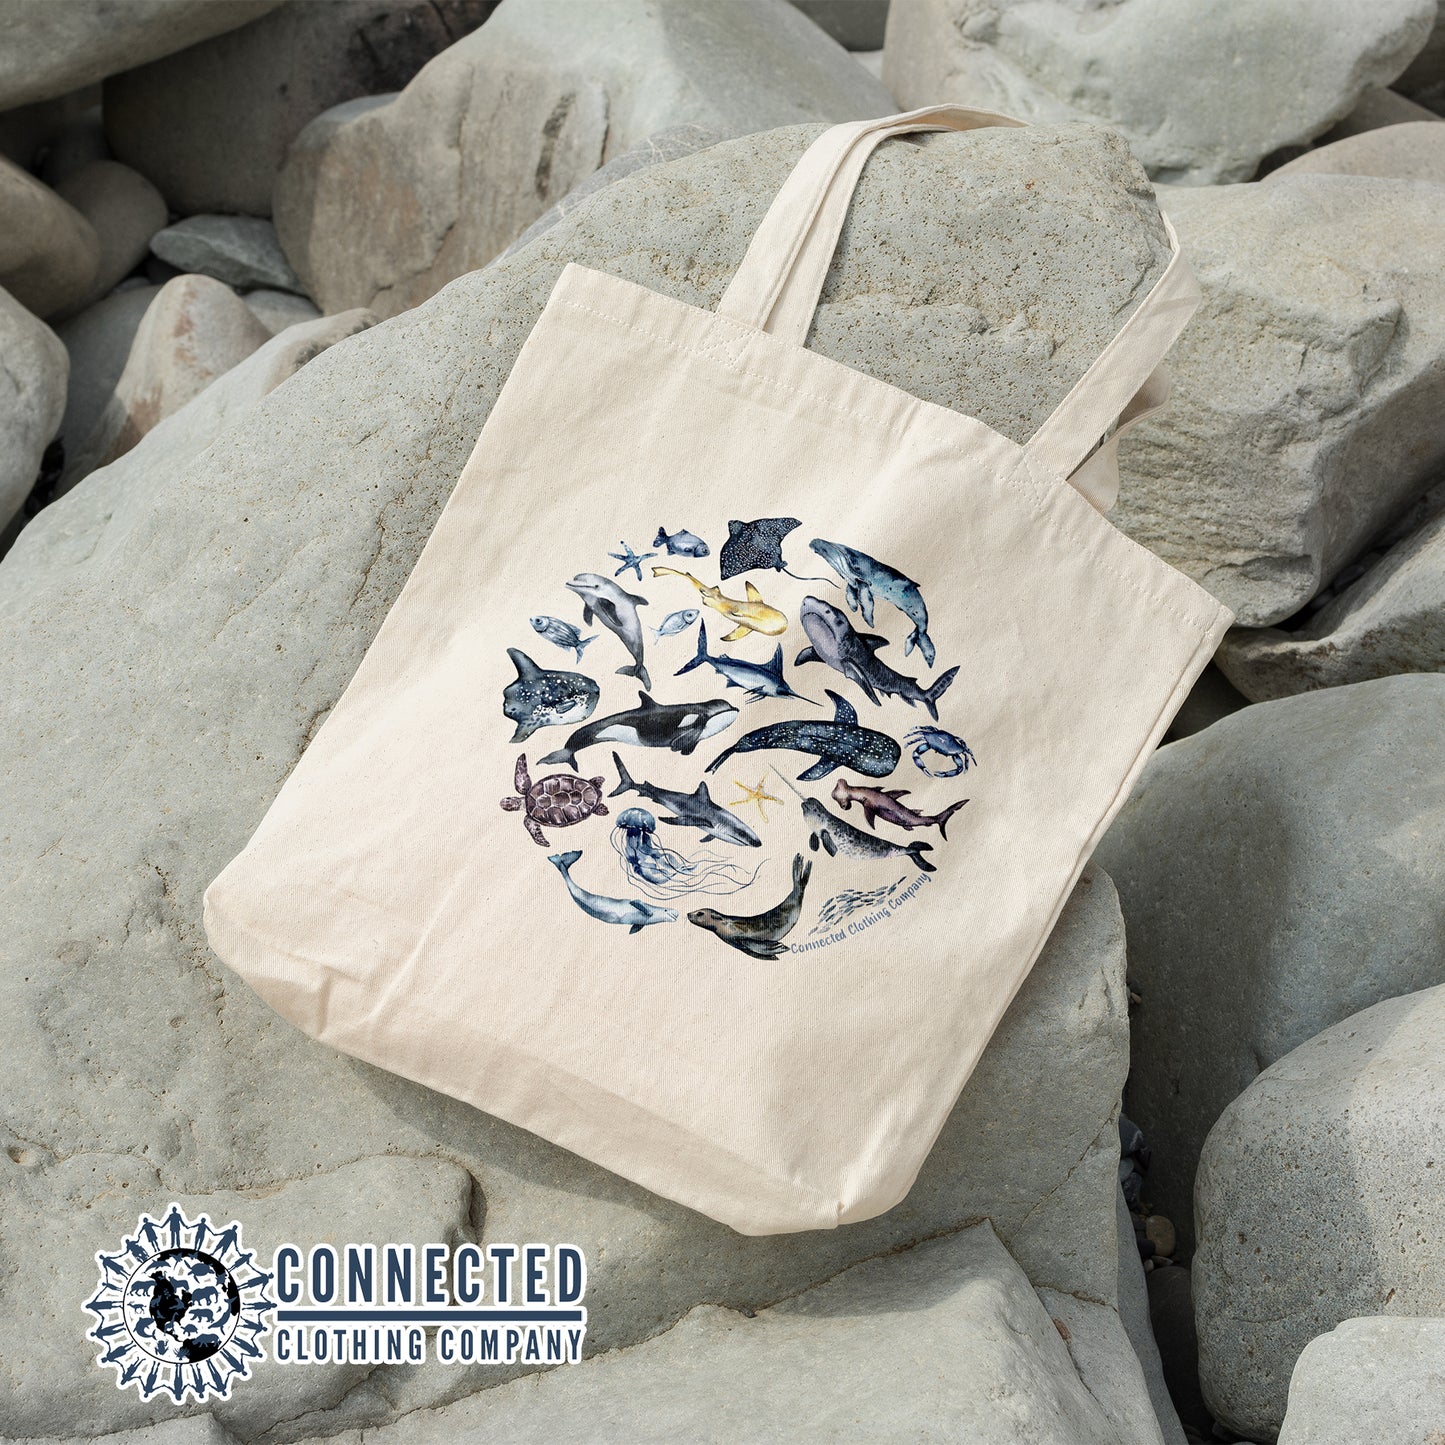 Blue Ocean Creatures Tote Bag - Connected Clothing Company - 10% donated to ocean conservation